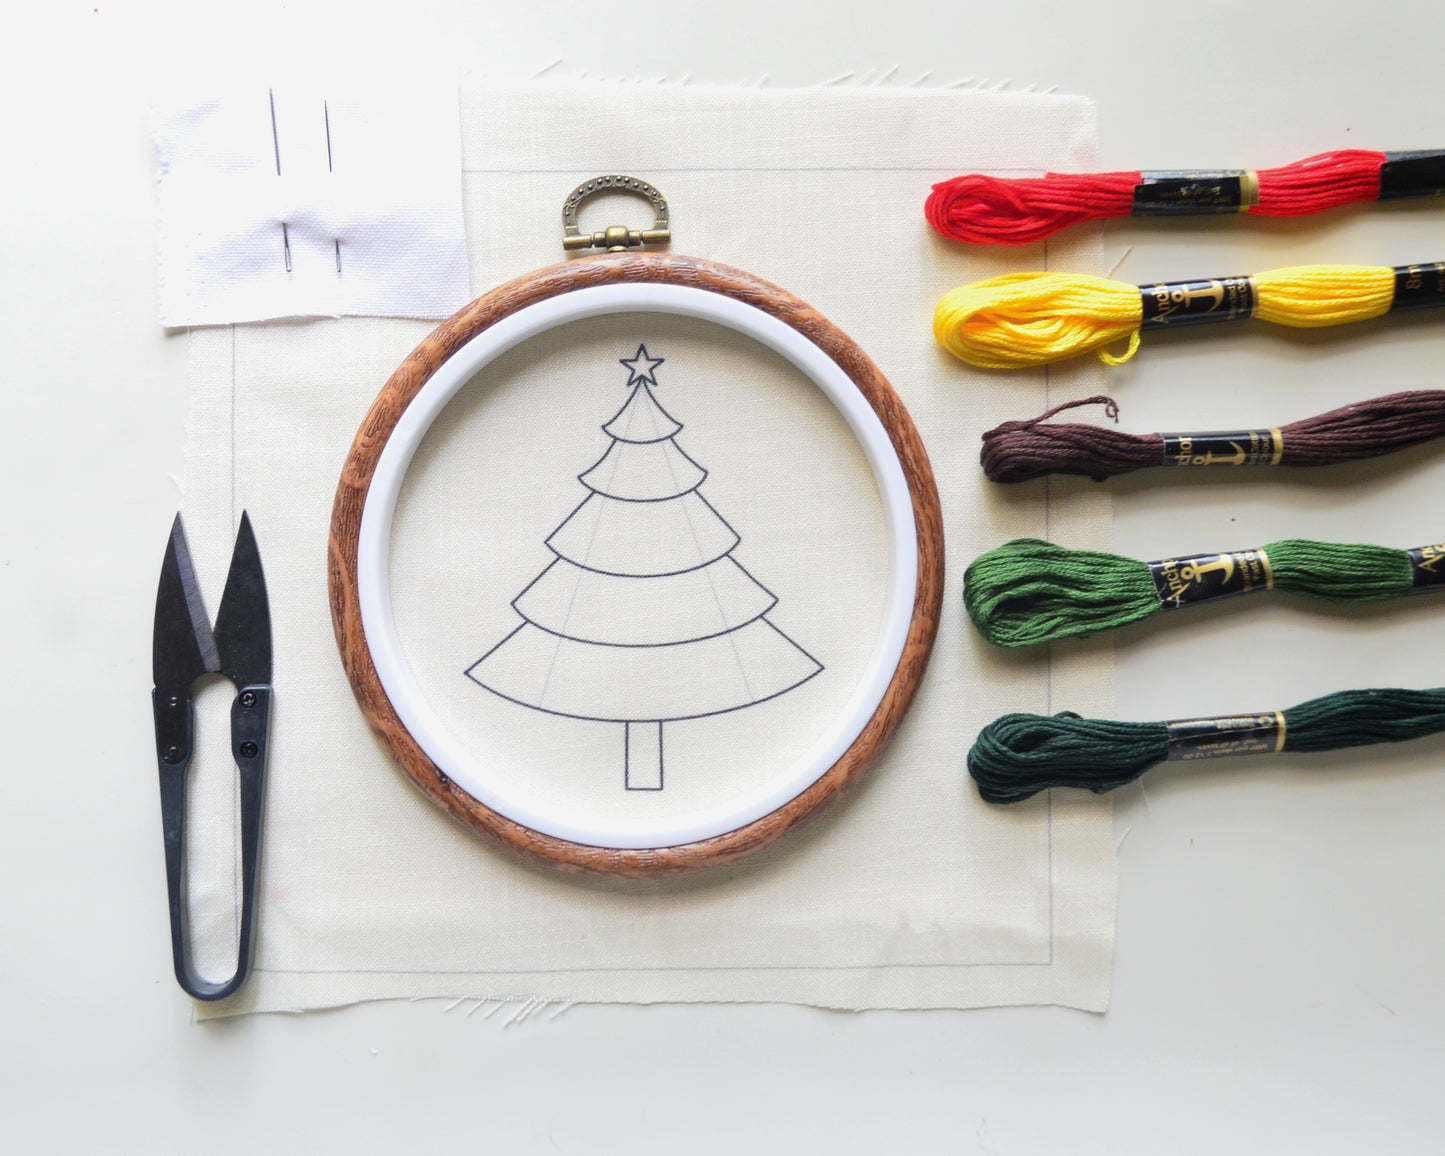 Make your own Christmas Tree - 5” Kit with tutorial